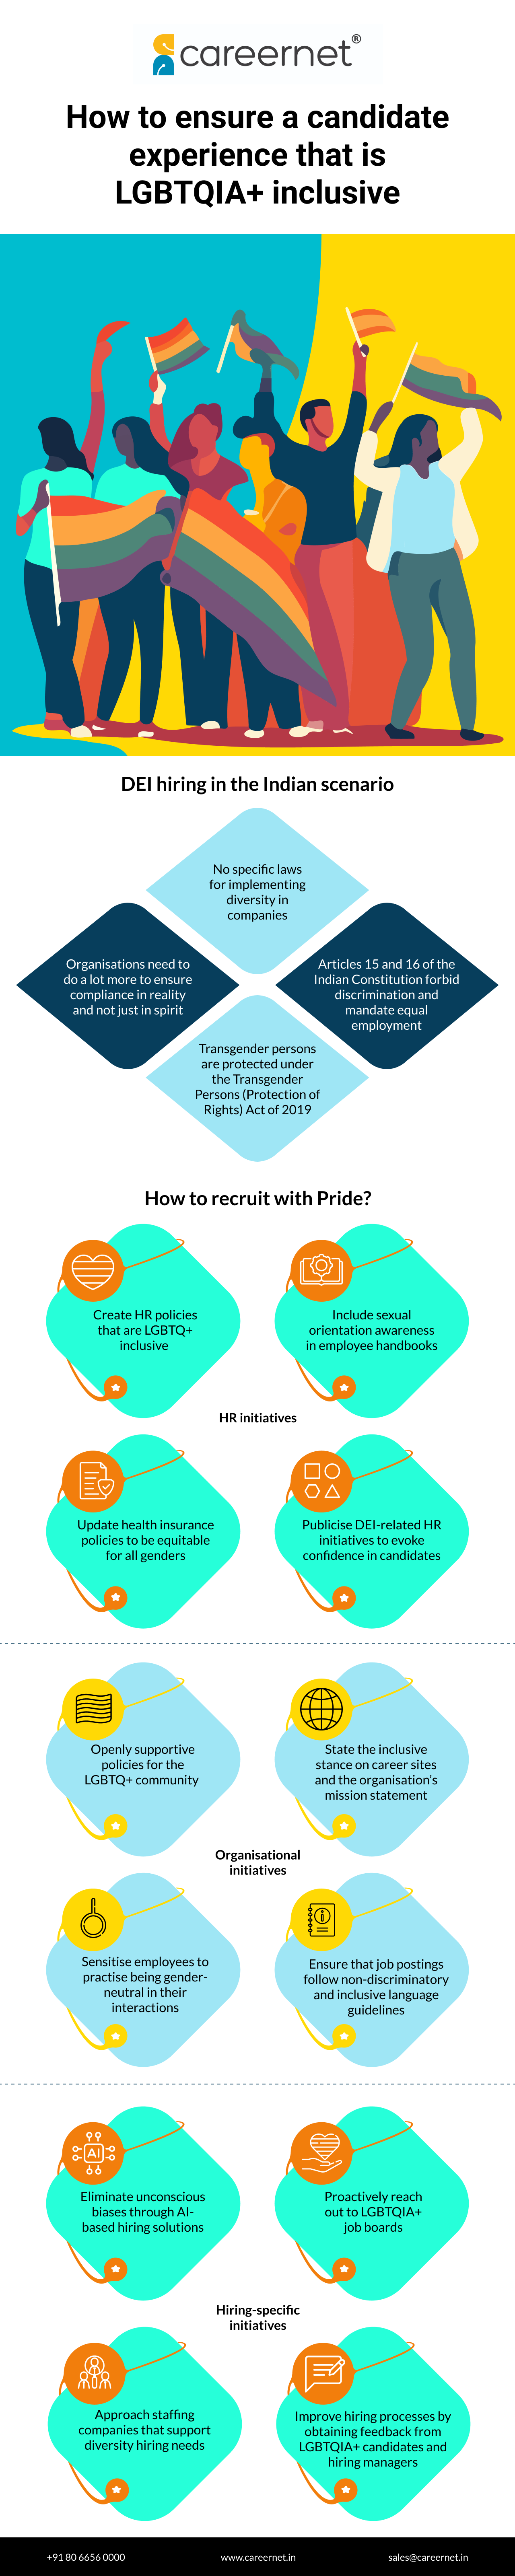 How to ensure a candidate experience that is LGBTQIA+ inclusive